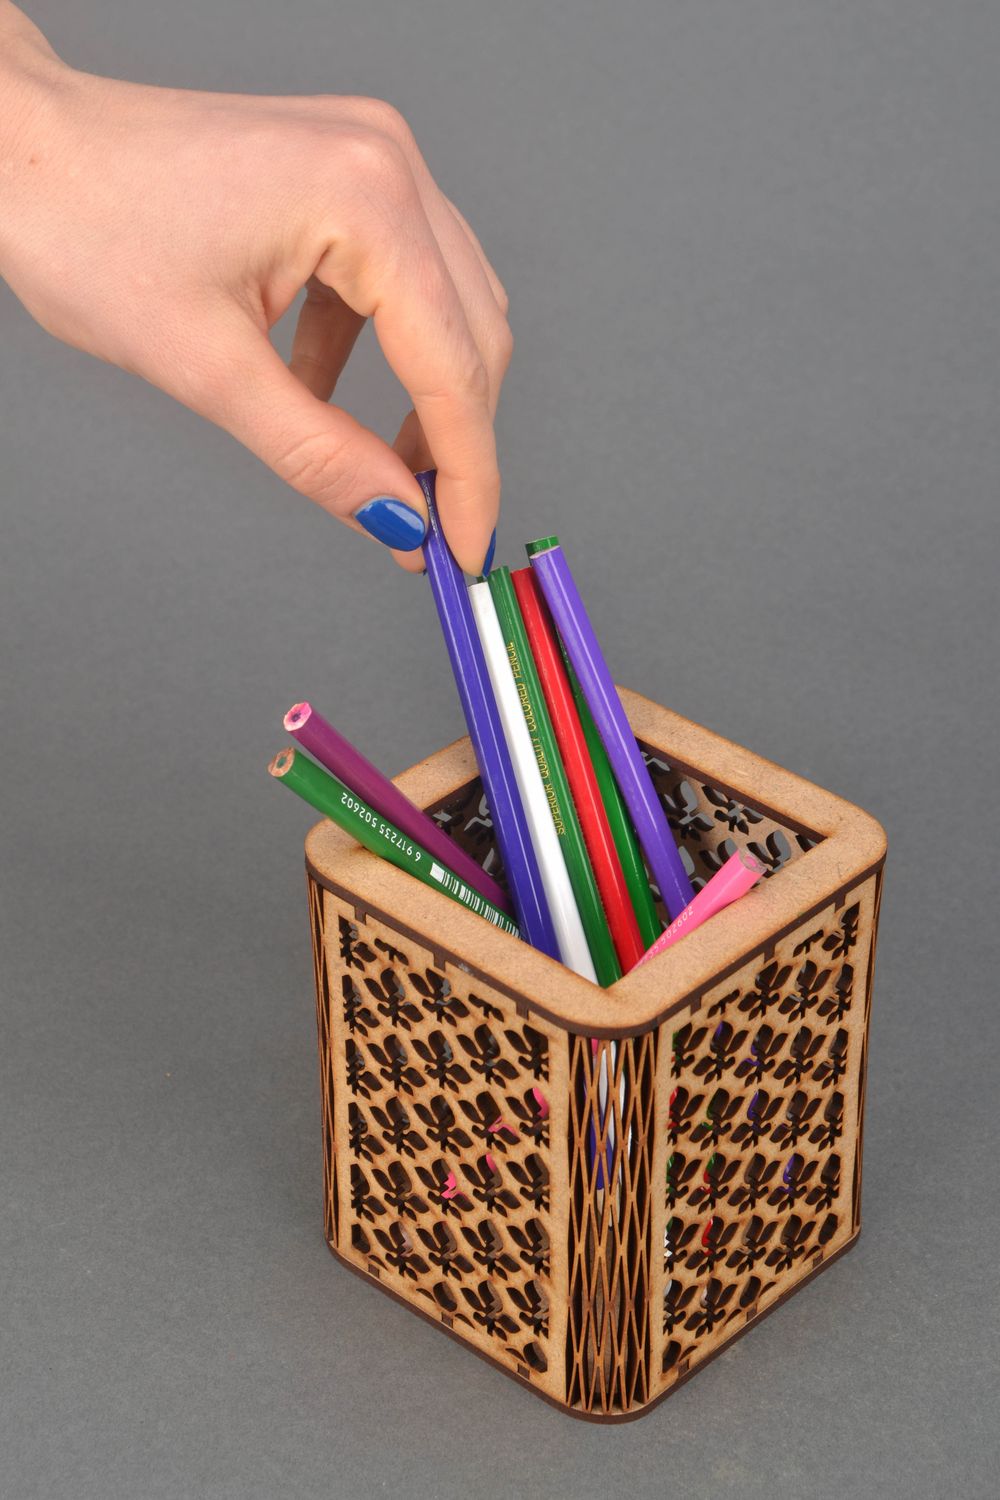 Plywood craft blank for pen holder photo 2